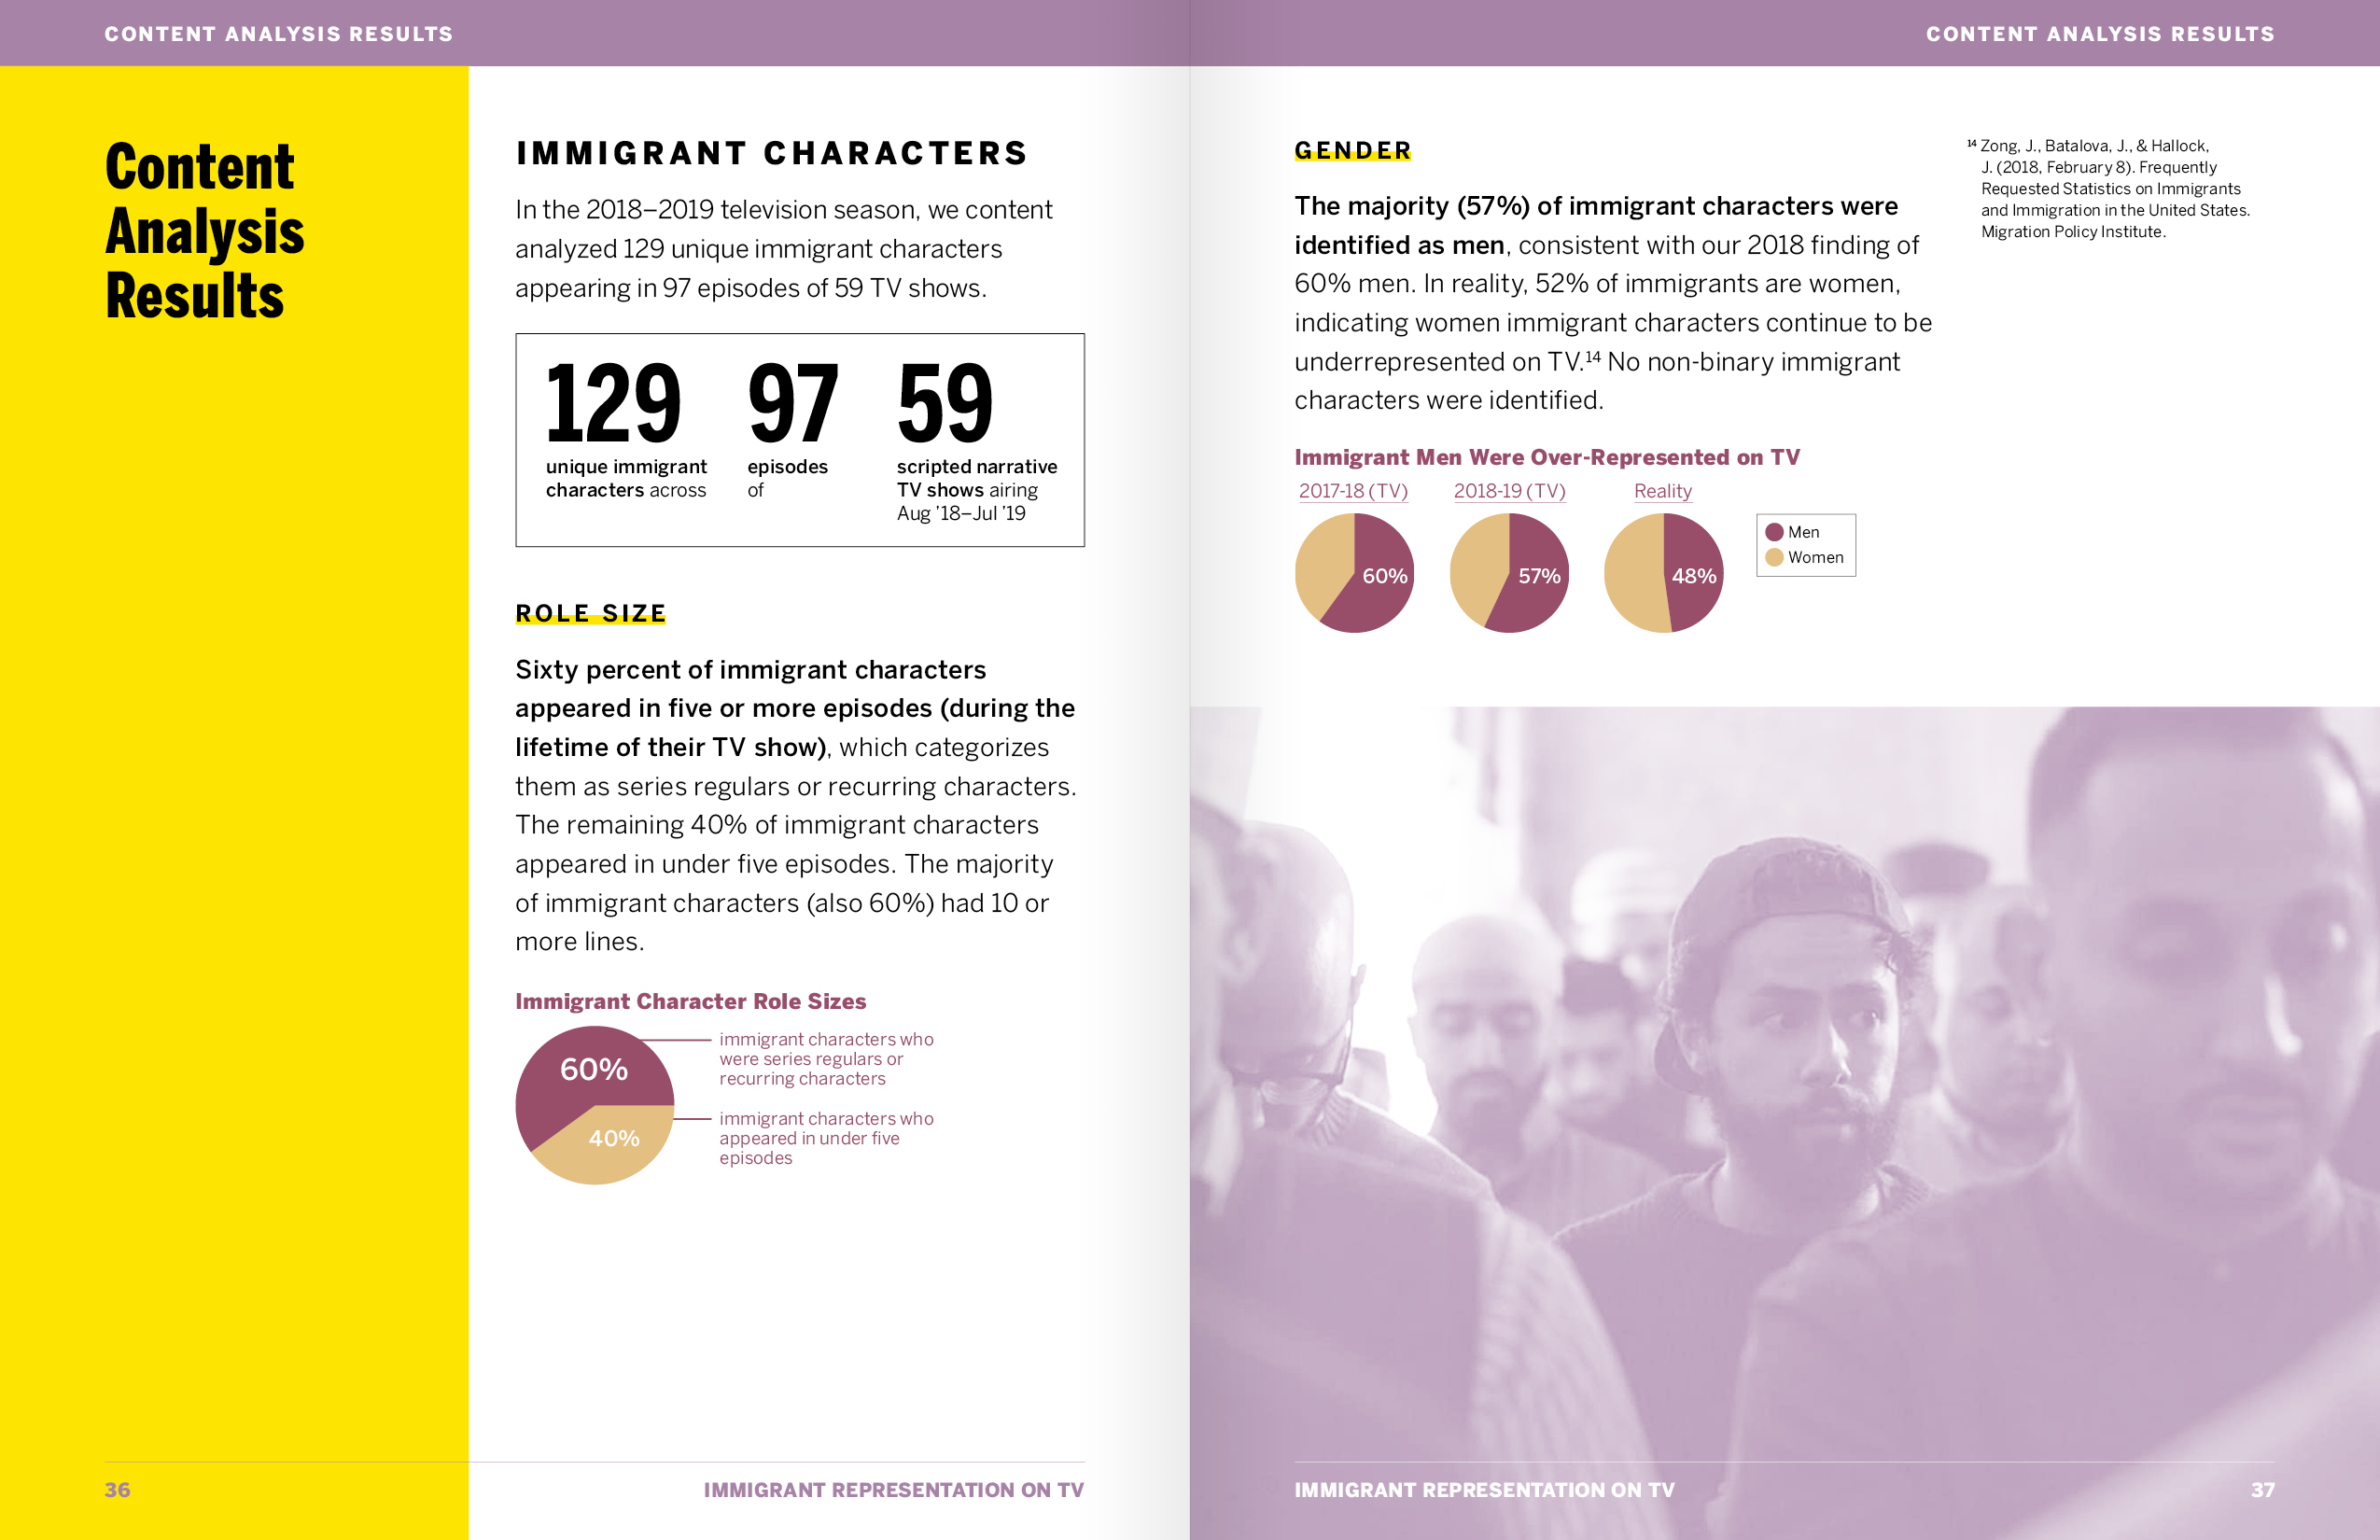 A spread from the Content Analysis section of the report, analyzing the number of unique immigrant characters and how their representation compared to real-life U.S. immigrant demographics.